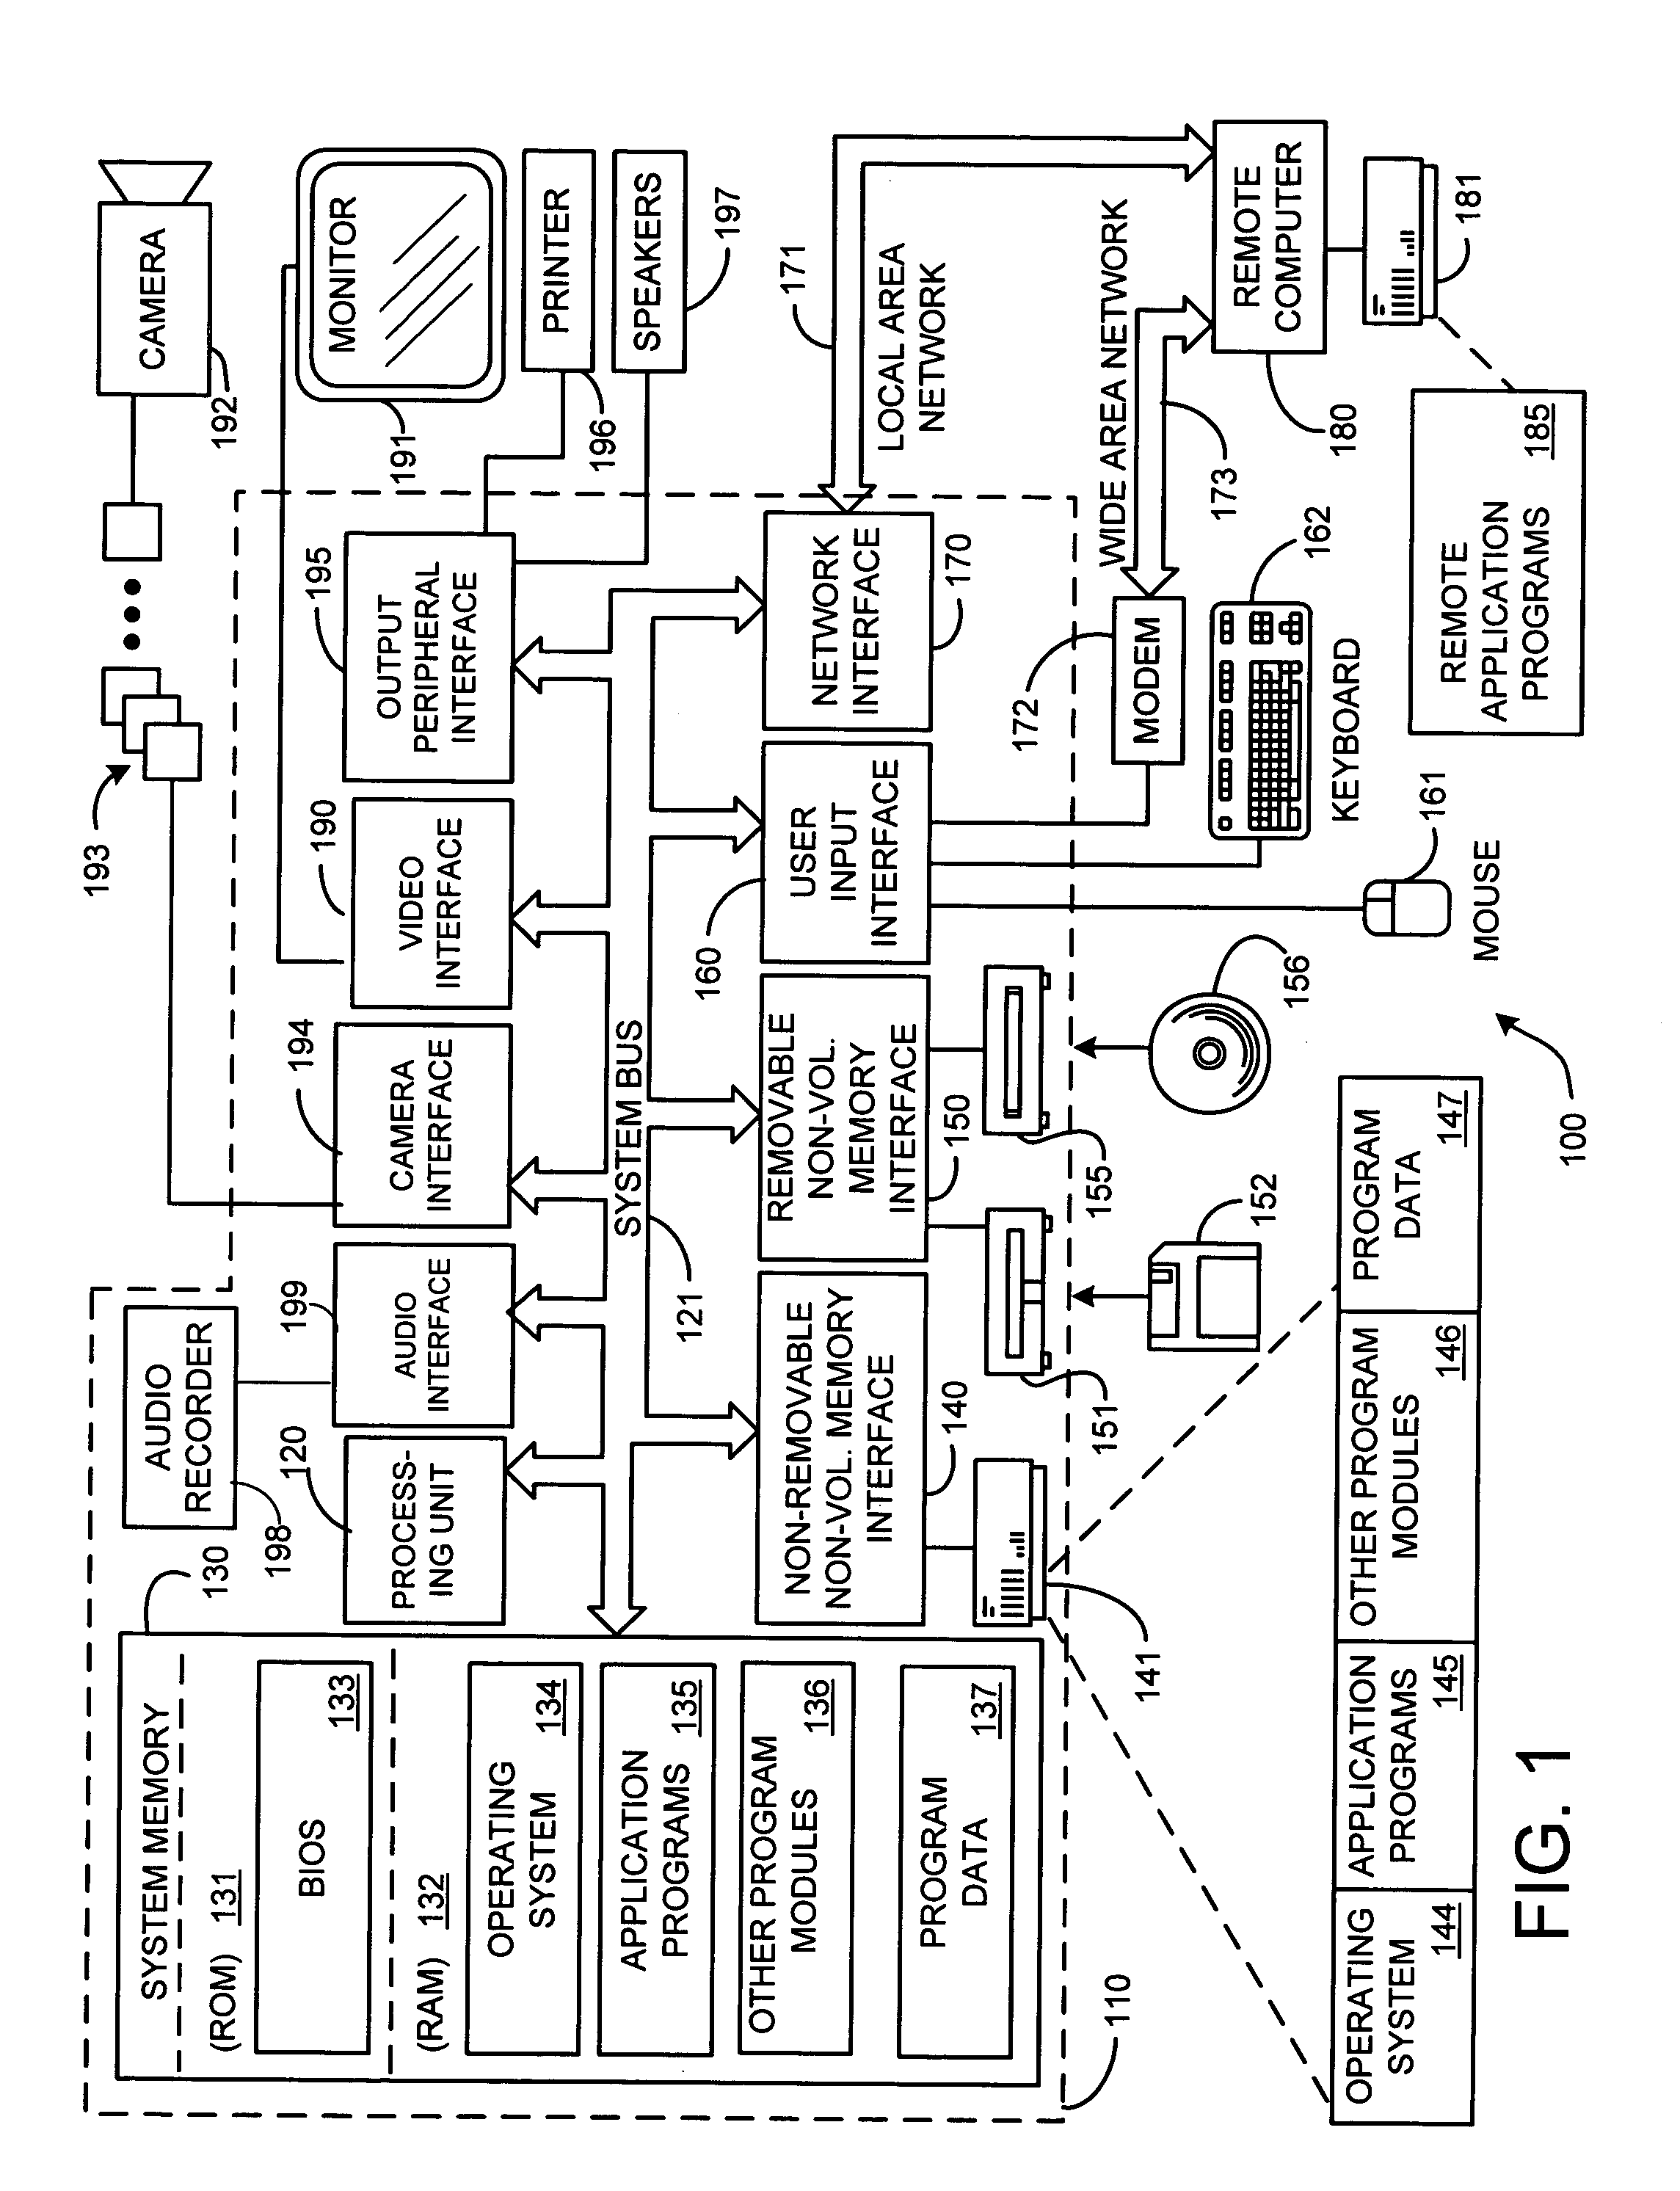 System and method for off-line multi-view video compression